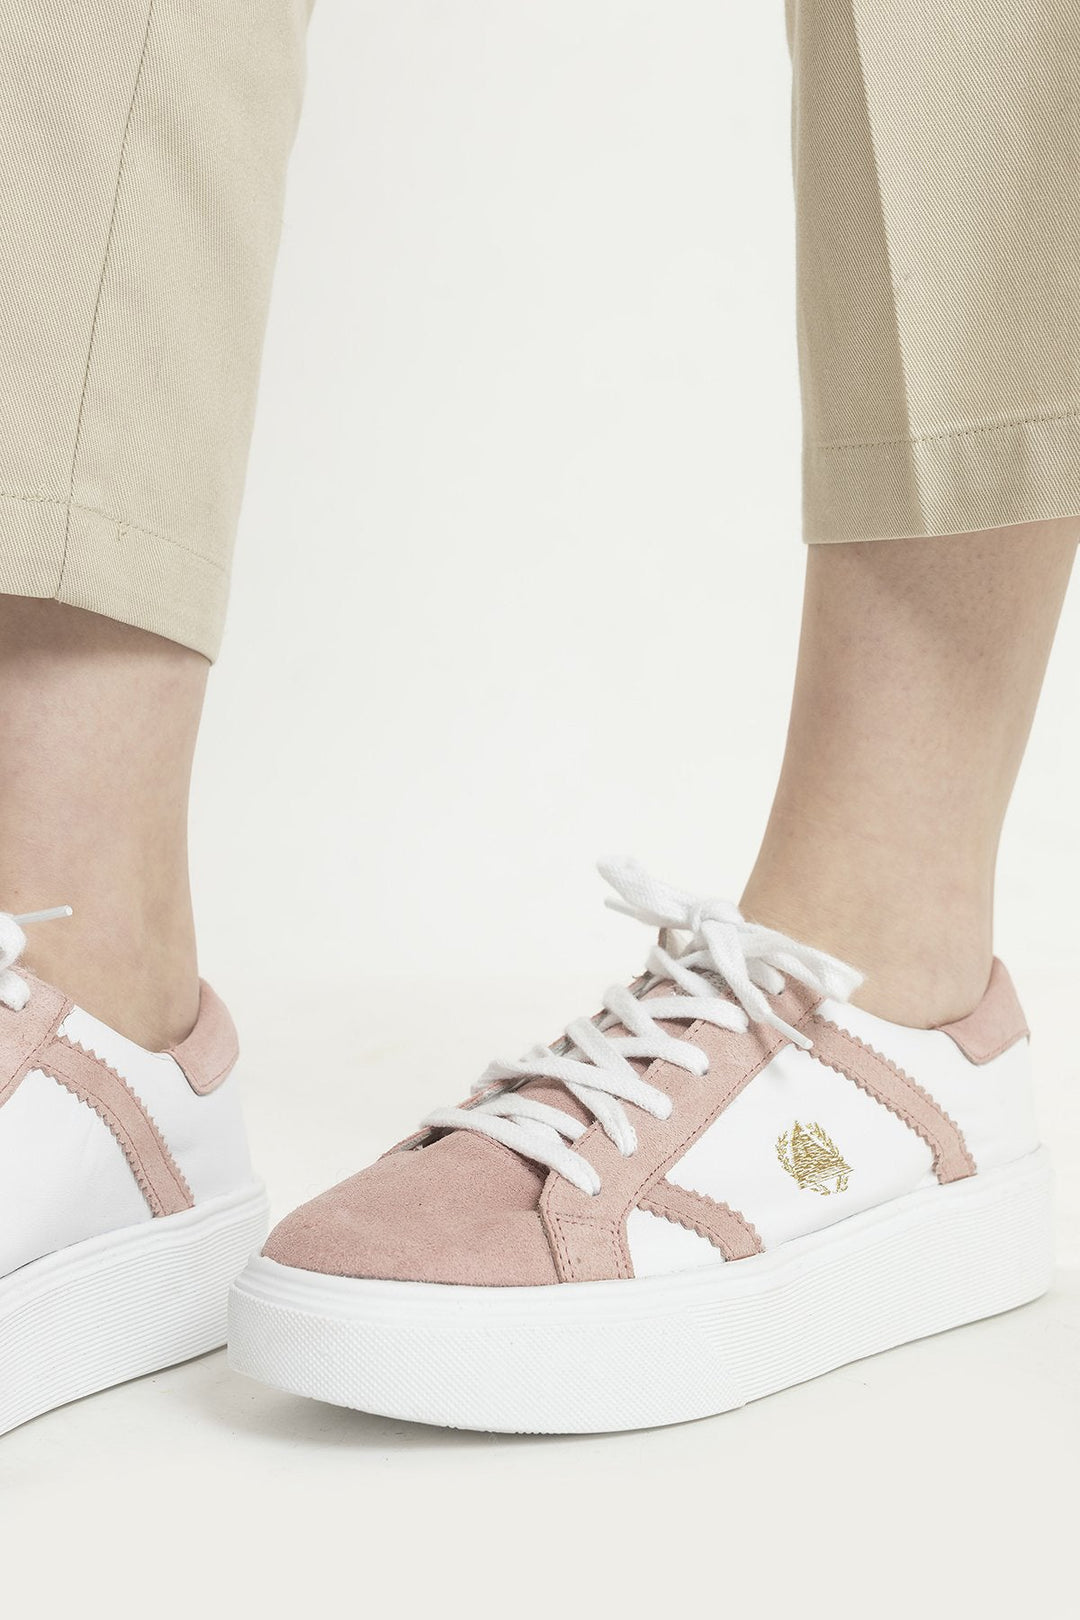 Hand Matters. Soft Pink high sneakers